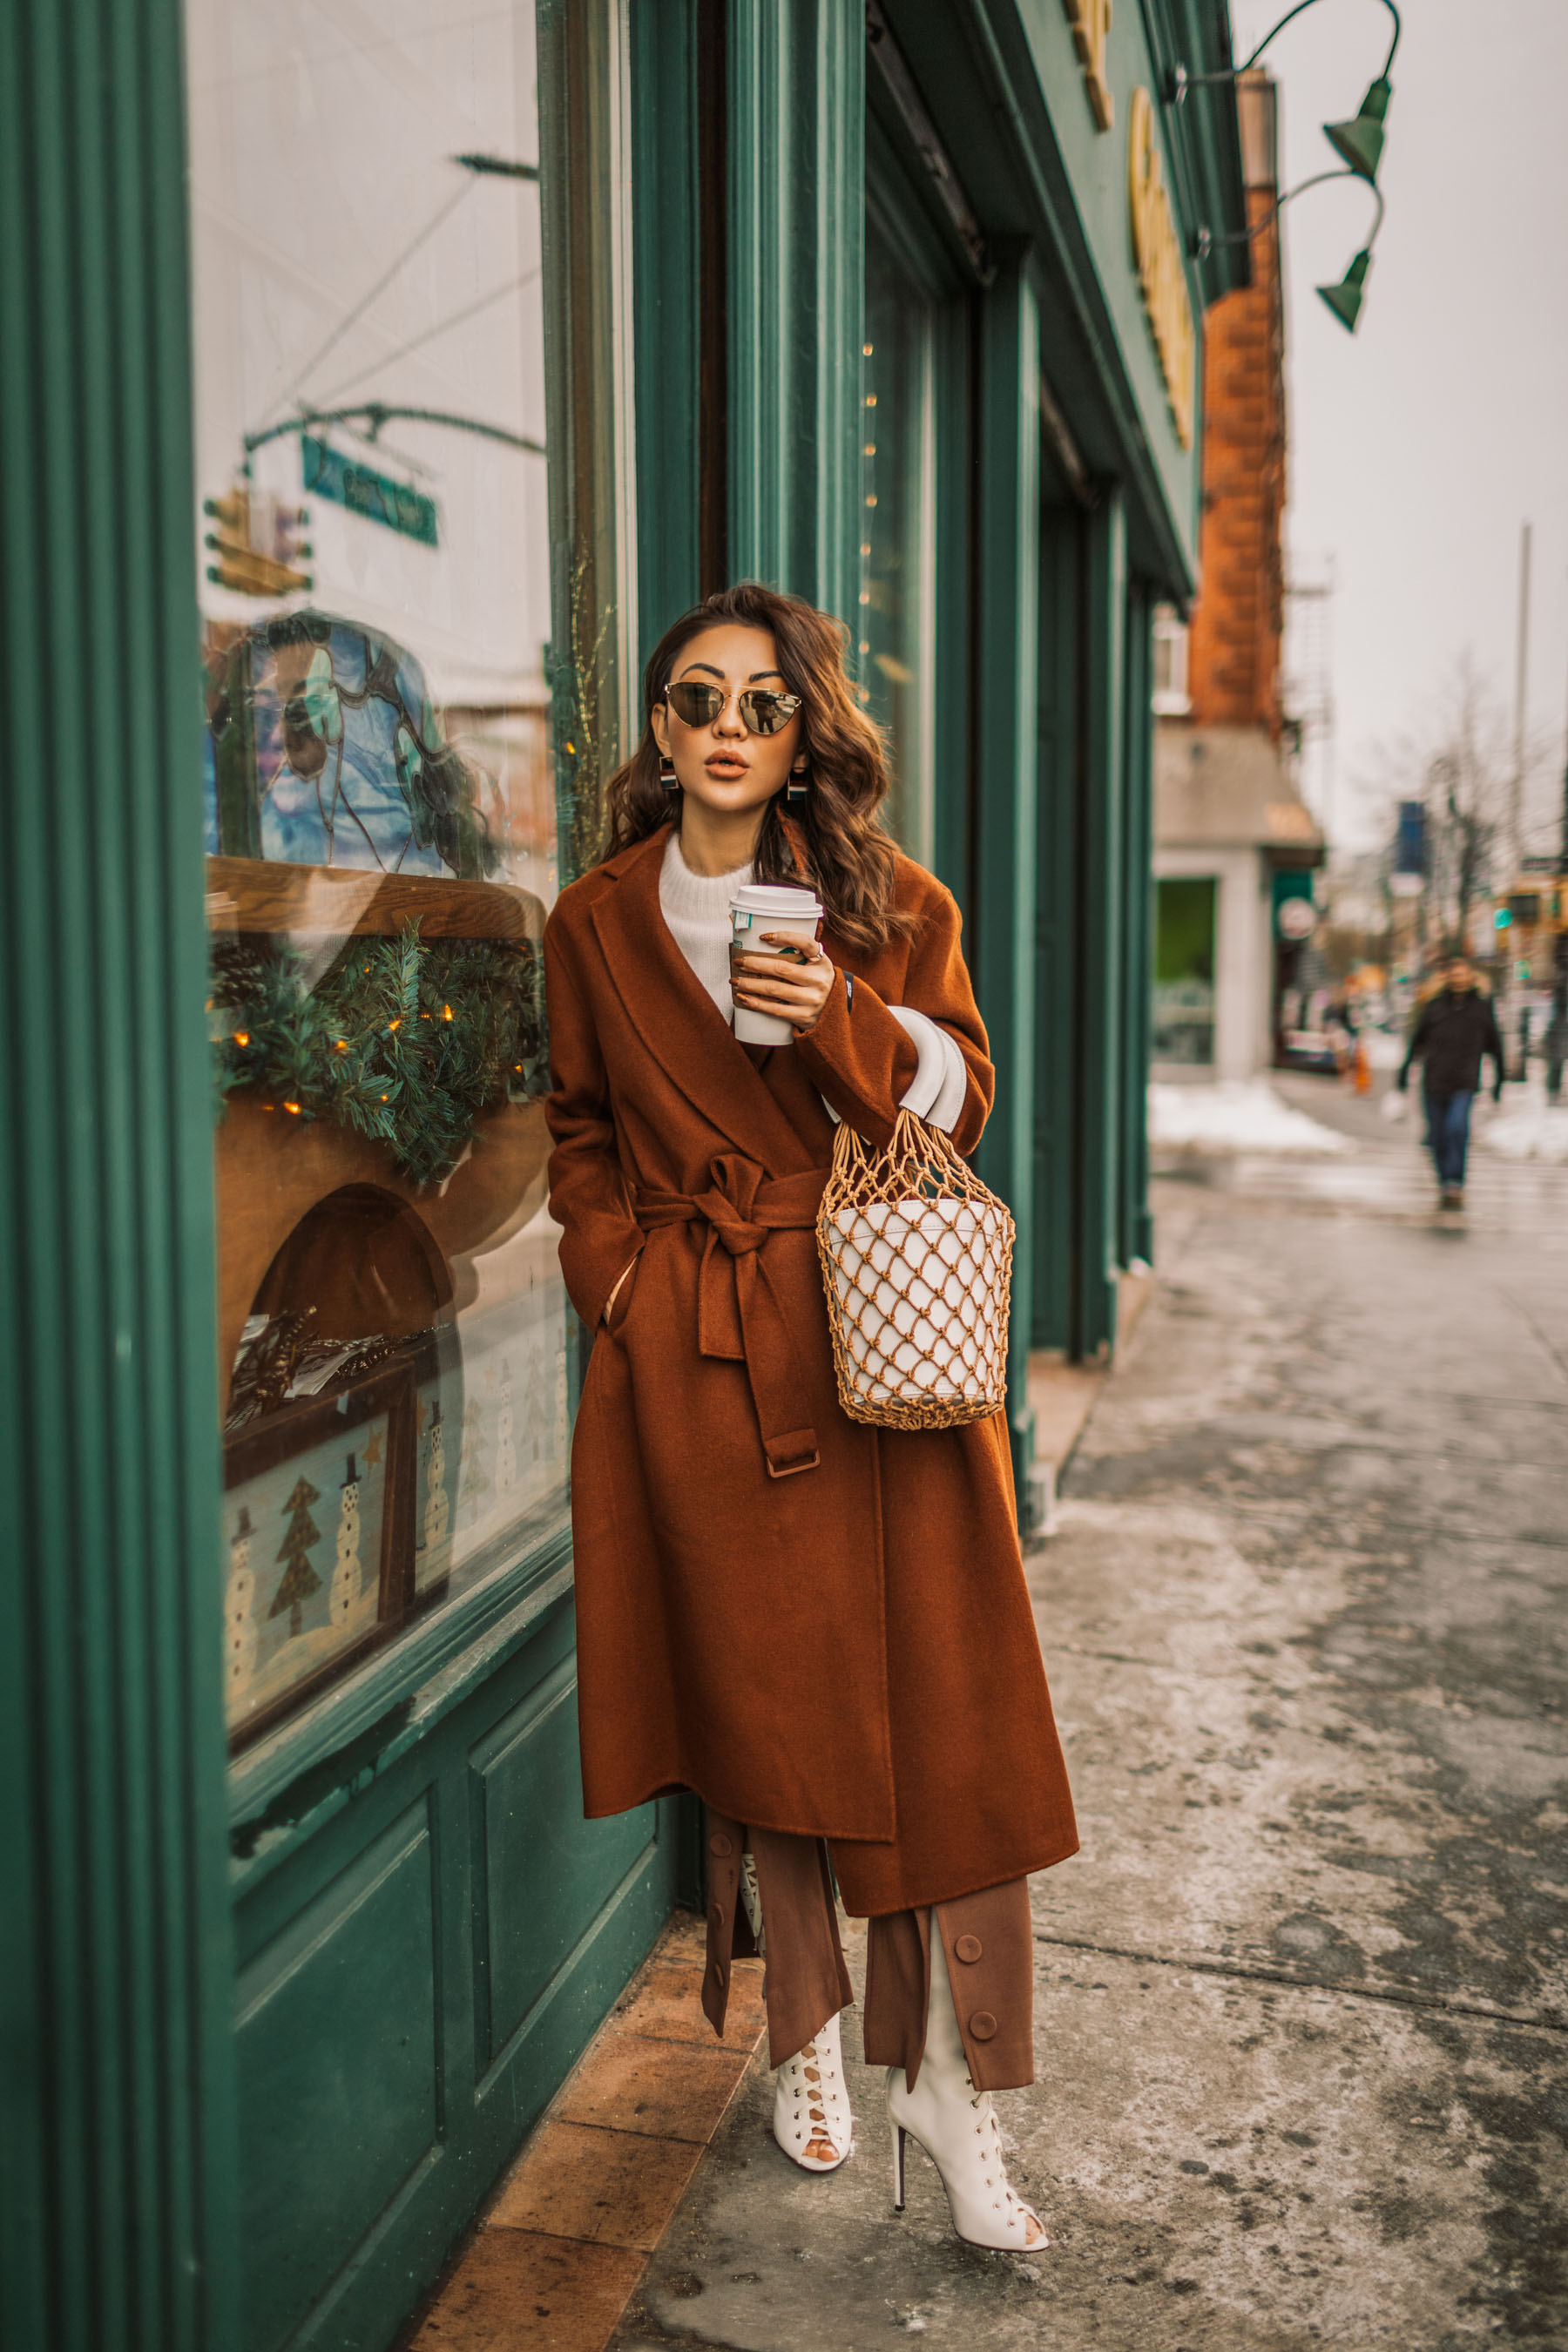 Up and Coming Handbag Brands to Know in 2018 // Notjessfashion.com // staud macrame bag, brown button trousers, wrap coat, robe coat, chic winter outfit, new york fashion blogger, aviator sunglasses